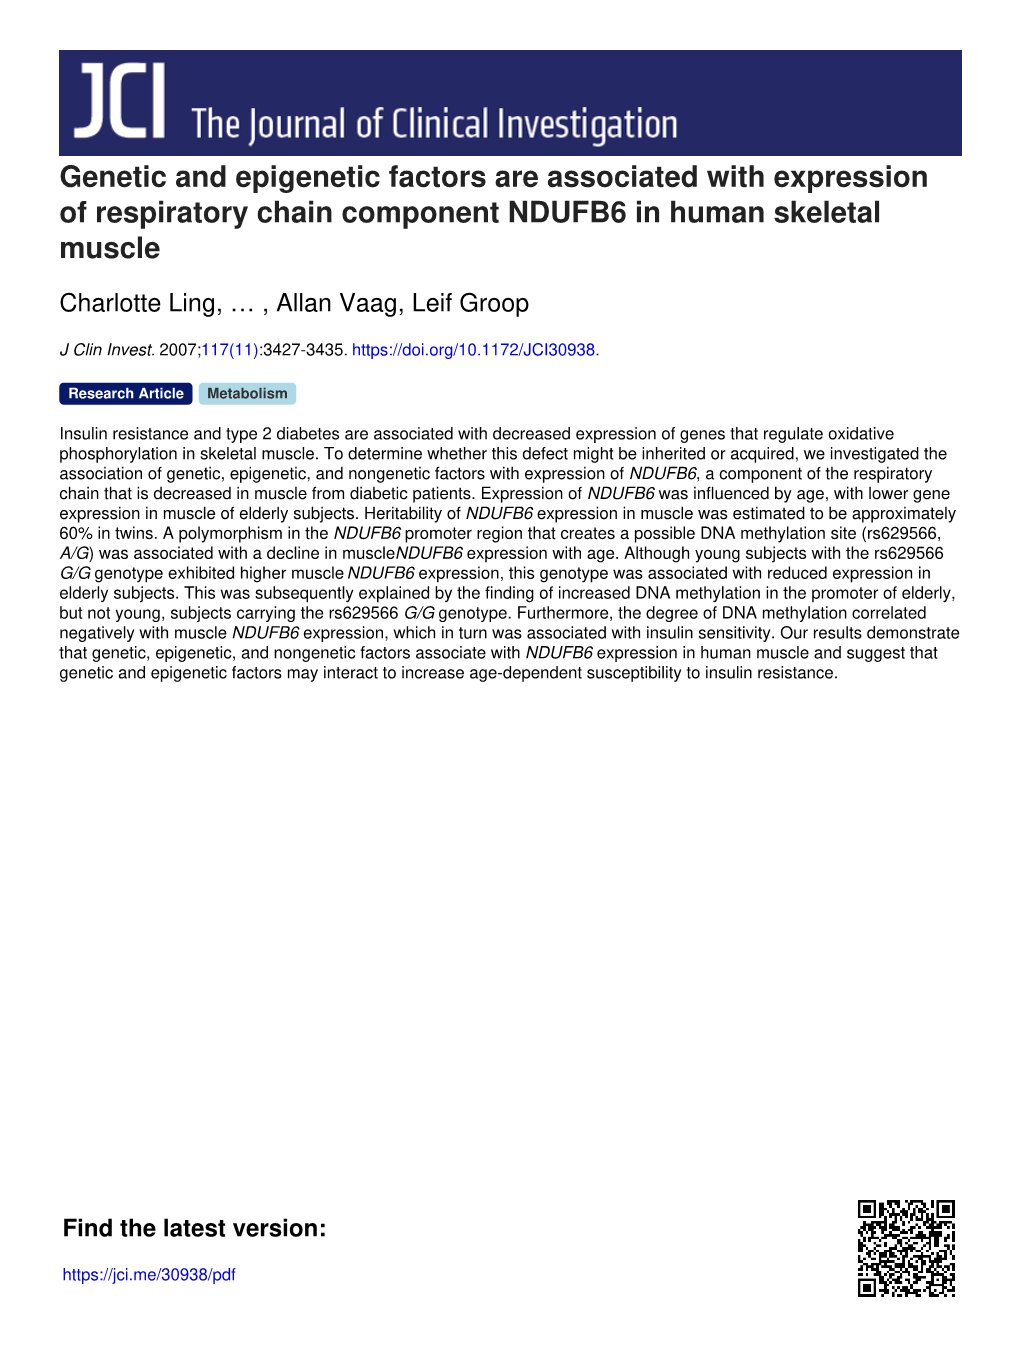 Genetic and Epigenetic Factors Are Associated with Expression of Respiratory Chain Component NDUFB6 in Human Skeletal Muscle